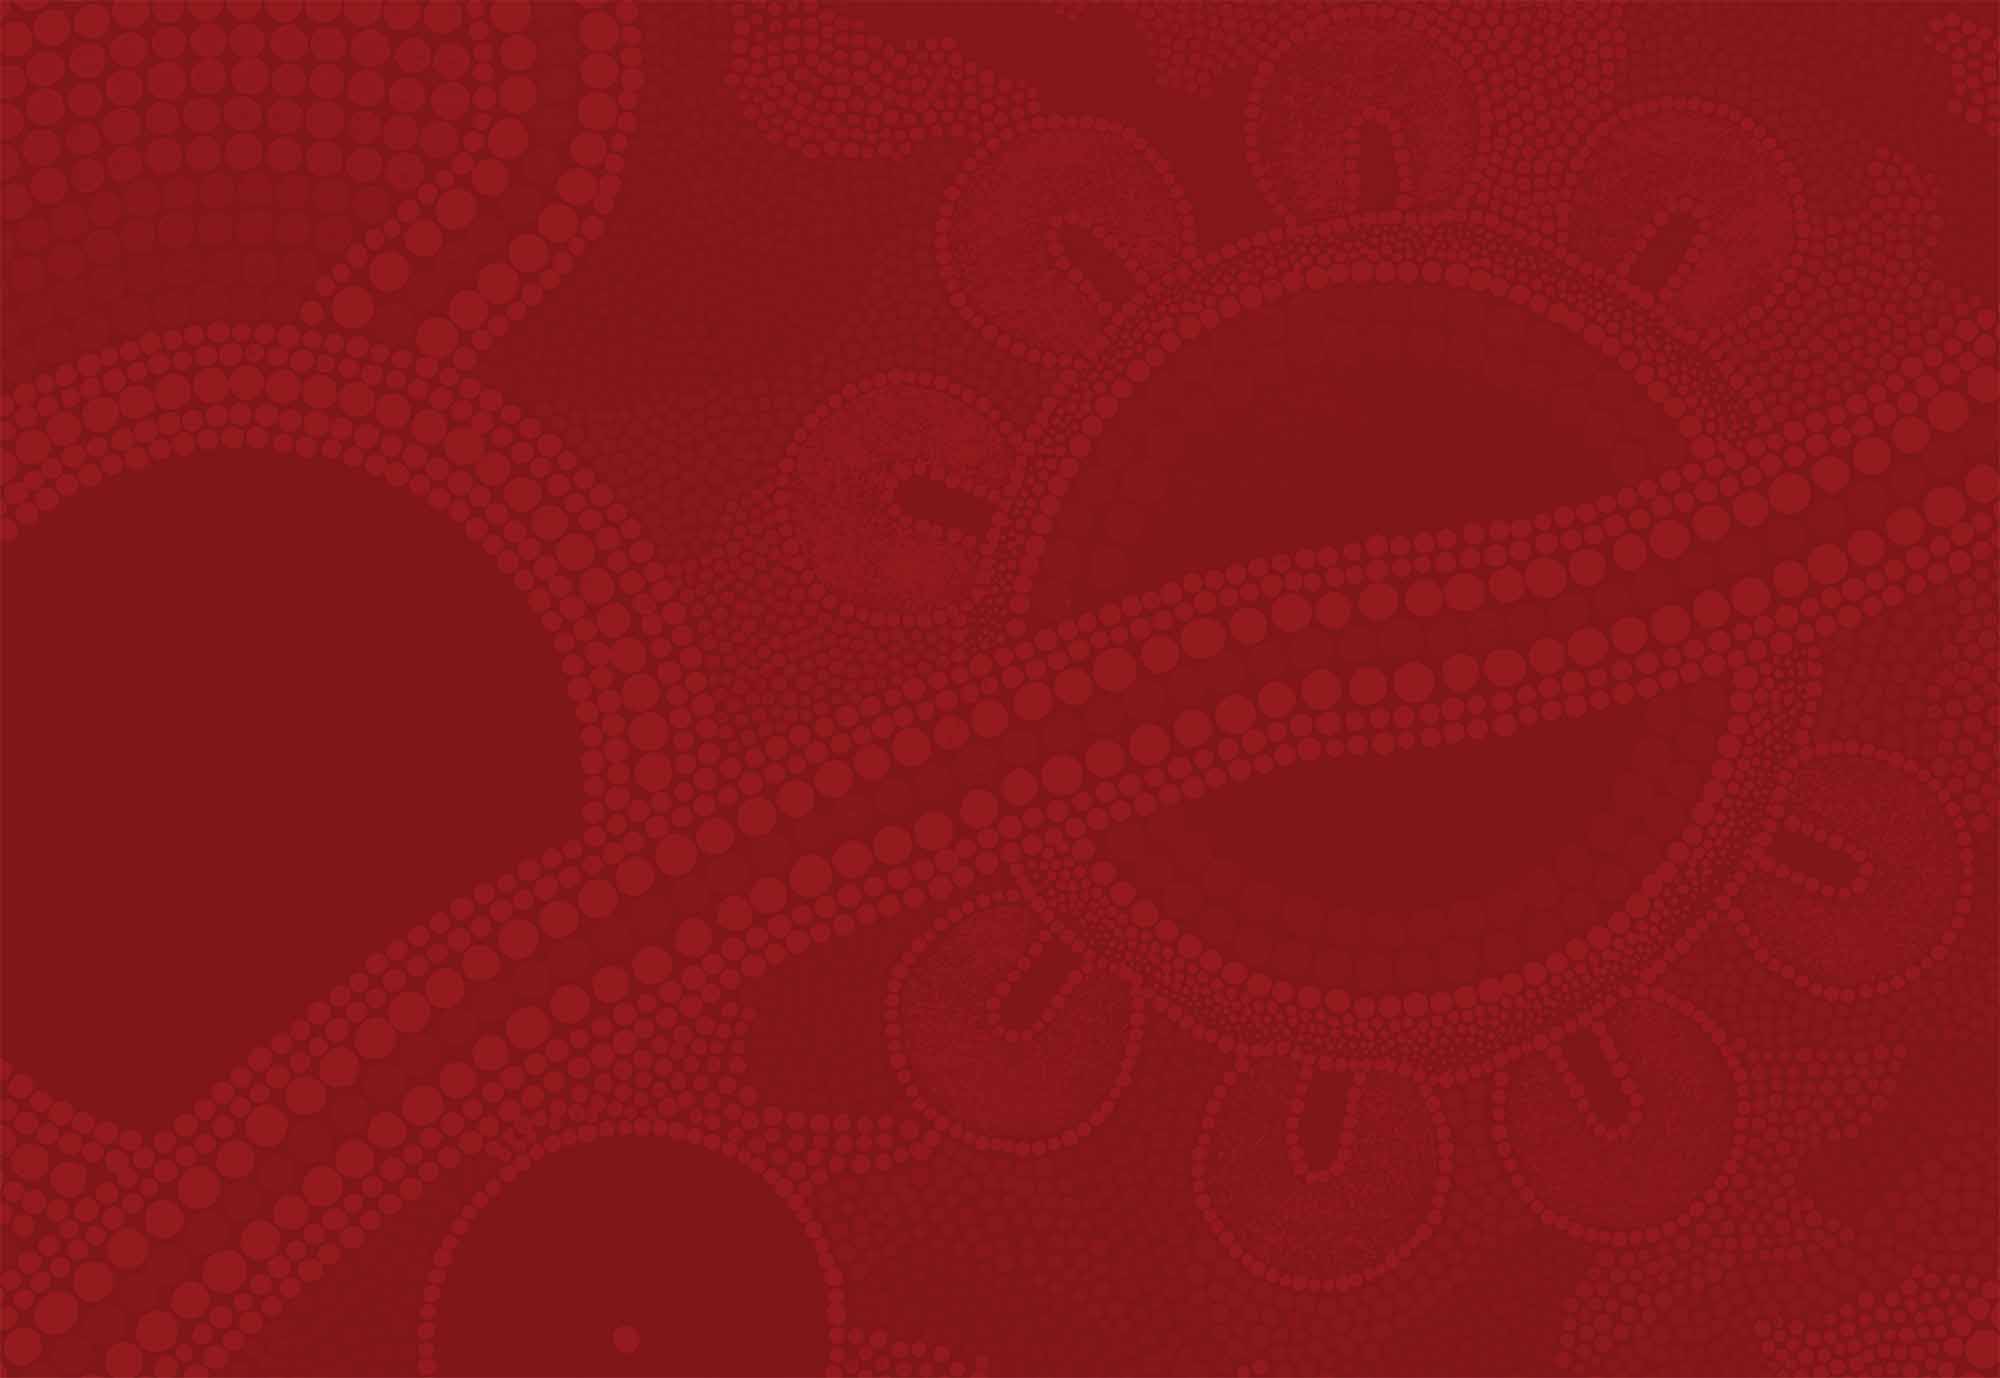 Image: Red background image with artwork